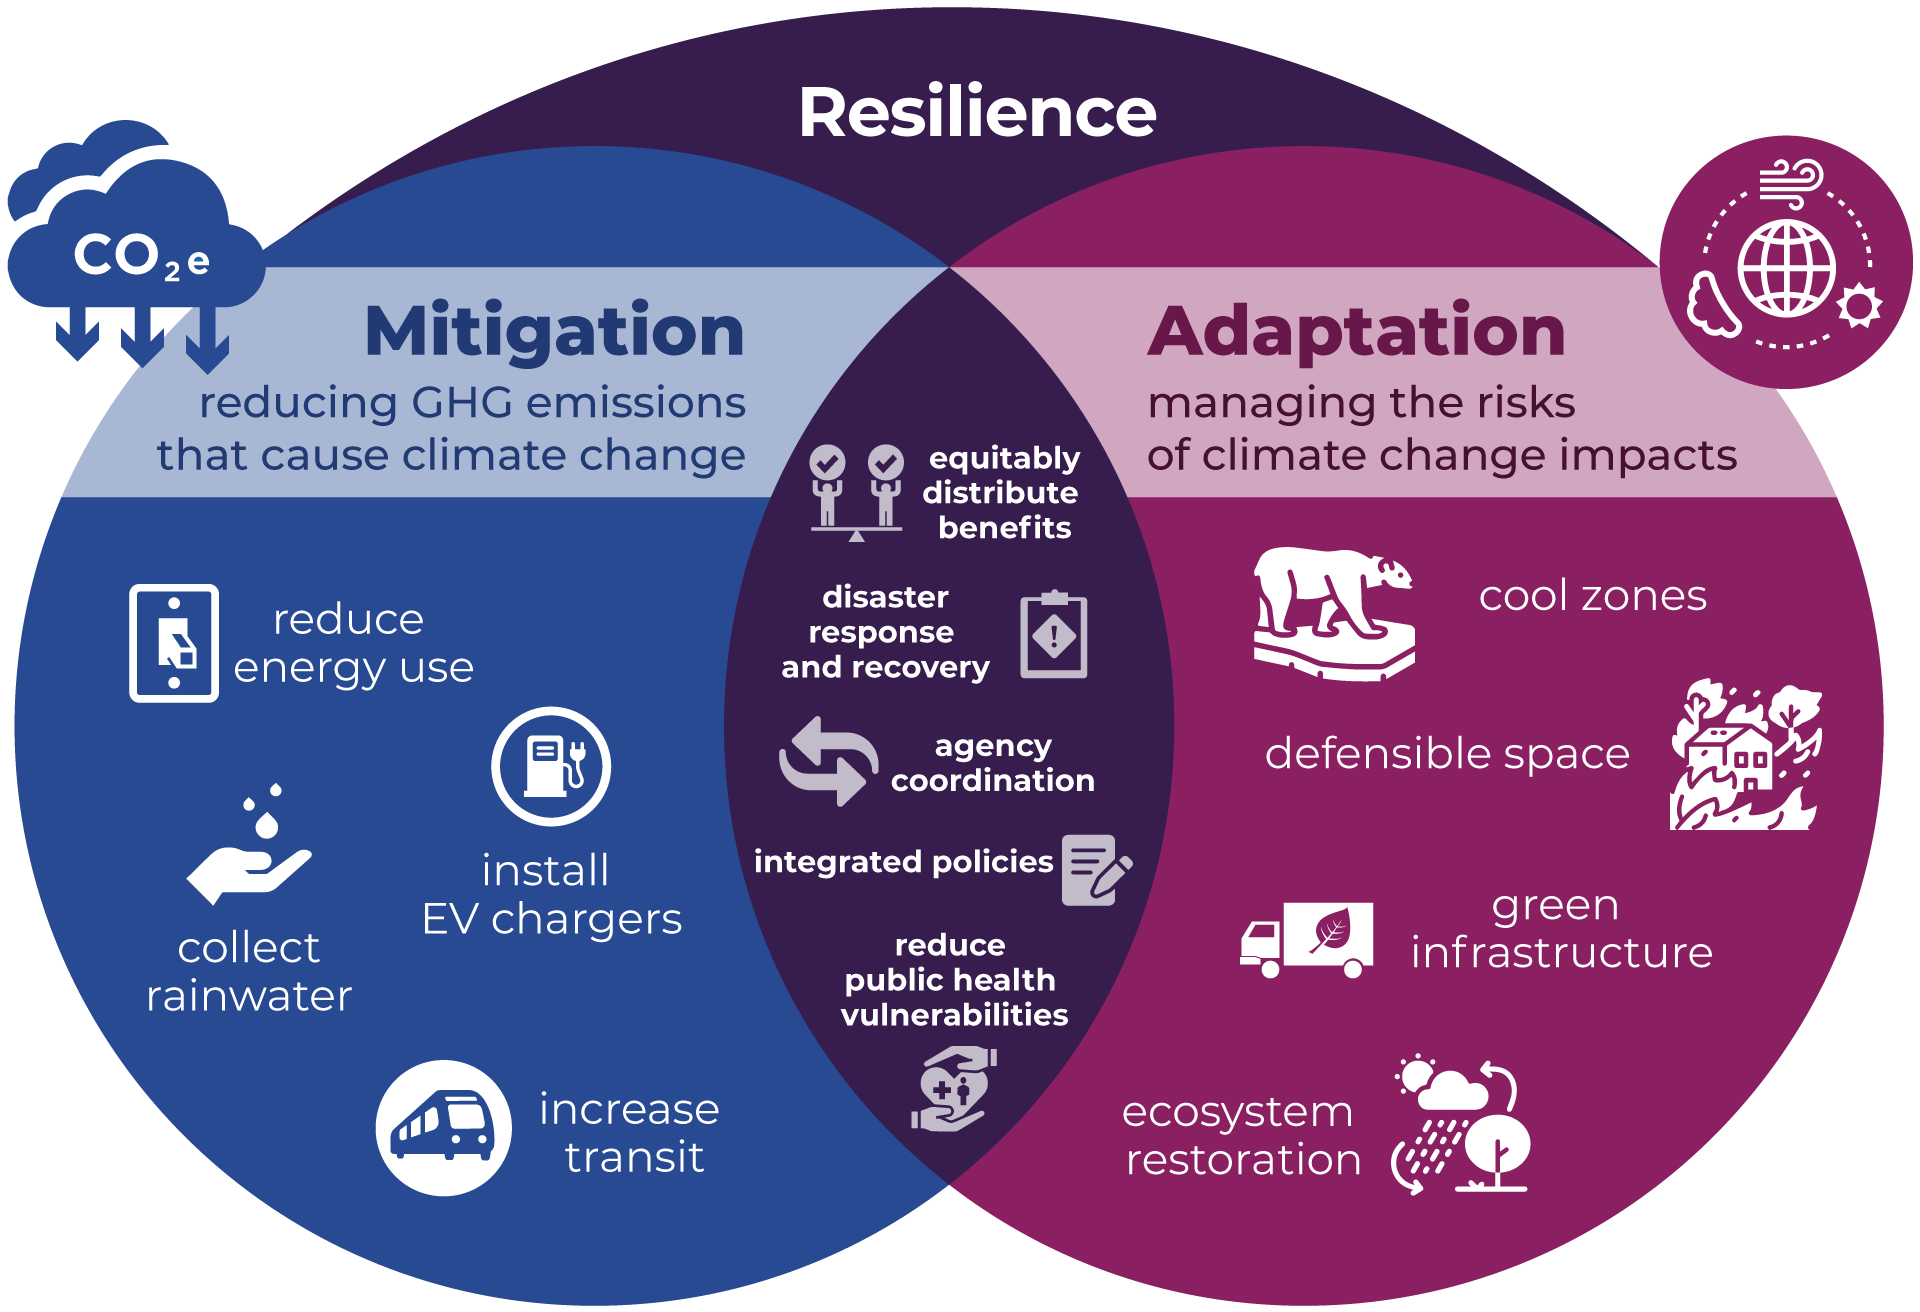 Venn diagram describing resilience as the intersection of mitigation and adaptation. Mitigation strategies listed include: reduce energy use, install EV chargers, collect rainwater, and increase transit. Adaptation strategies listed include: cool zones, defensible space, green infrastructure, and ecosystem restoration. Strategies that overlap include: equitable distribution of benefits, disaster response and recovery, agency coordination, integrated policies, and reduced public health vulnerabilities.